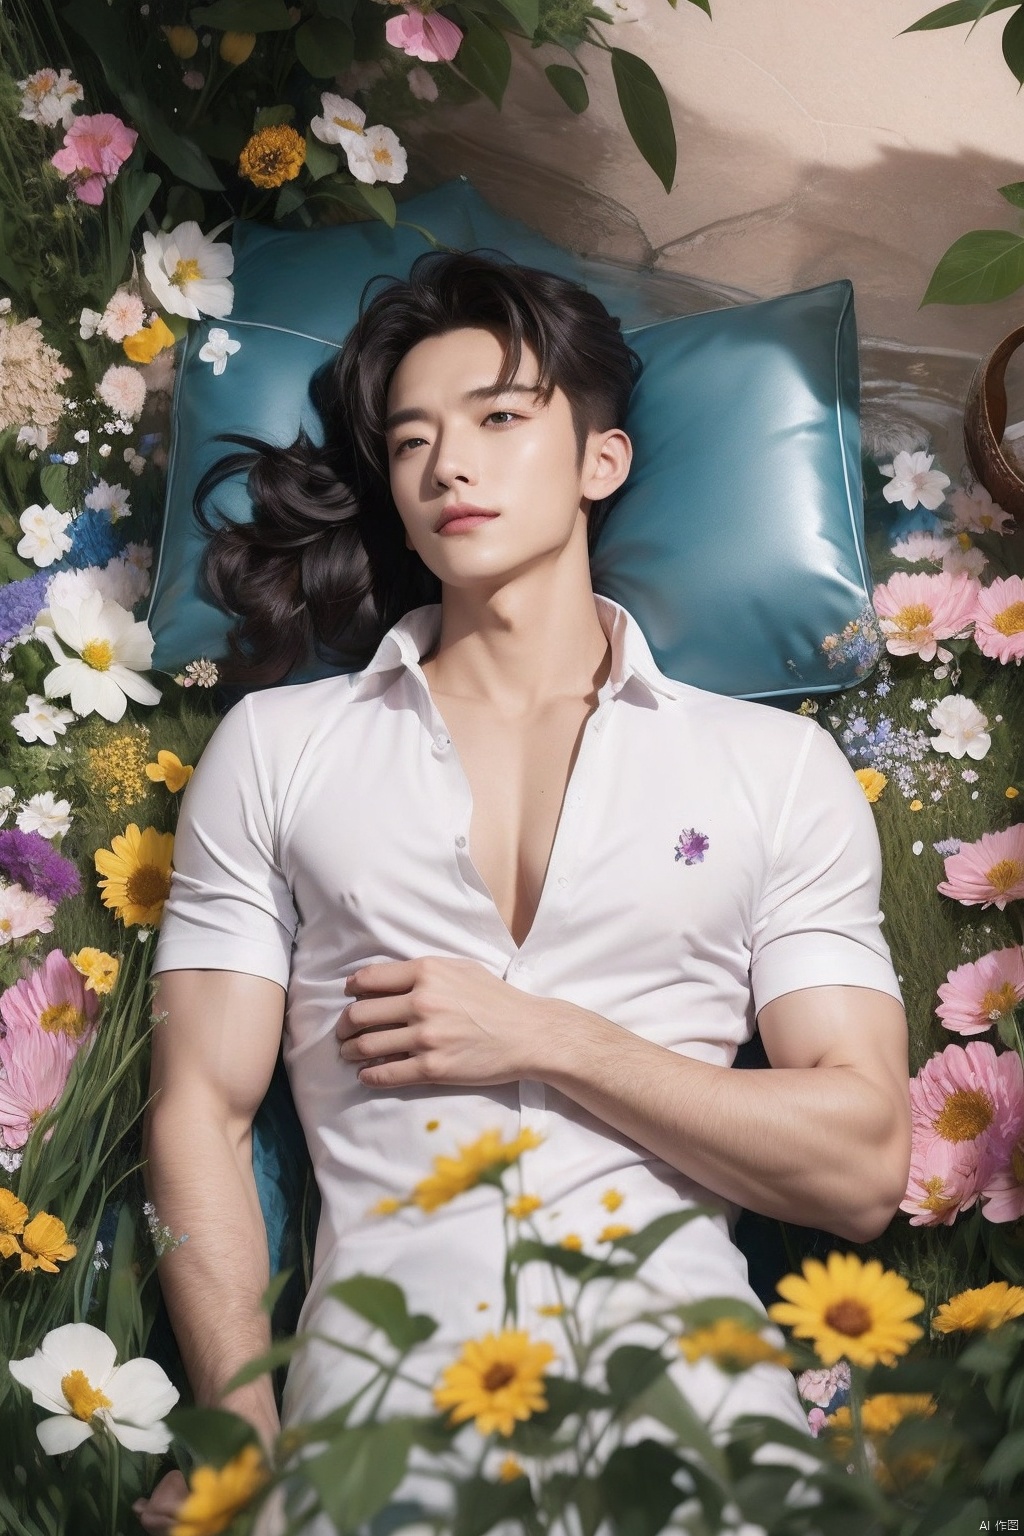  handsome male,pov, ((( lying in flowers))), hundreds of flowers,Flowers covered,Flowers flooded the handsome guy,男